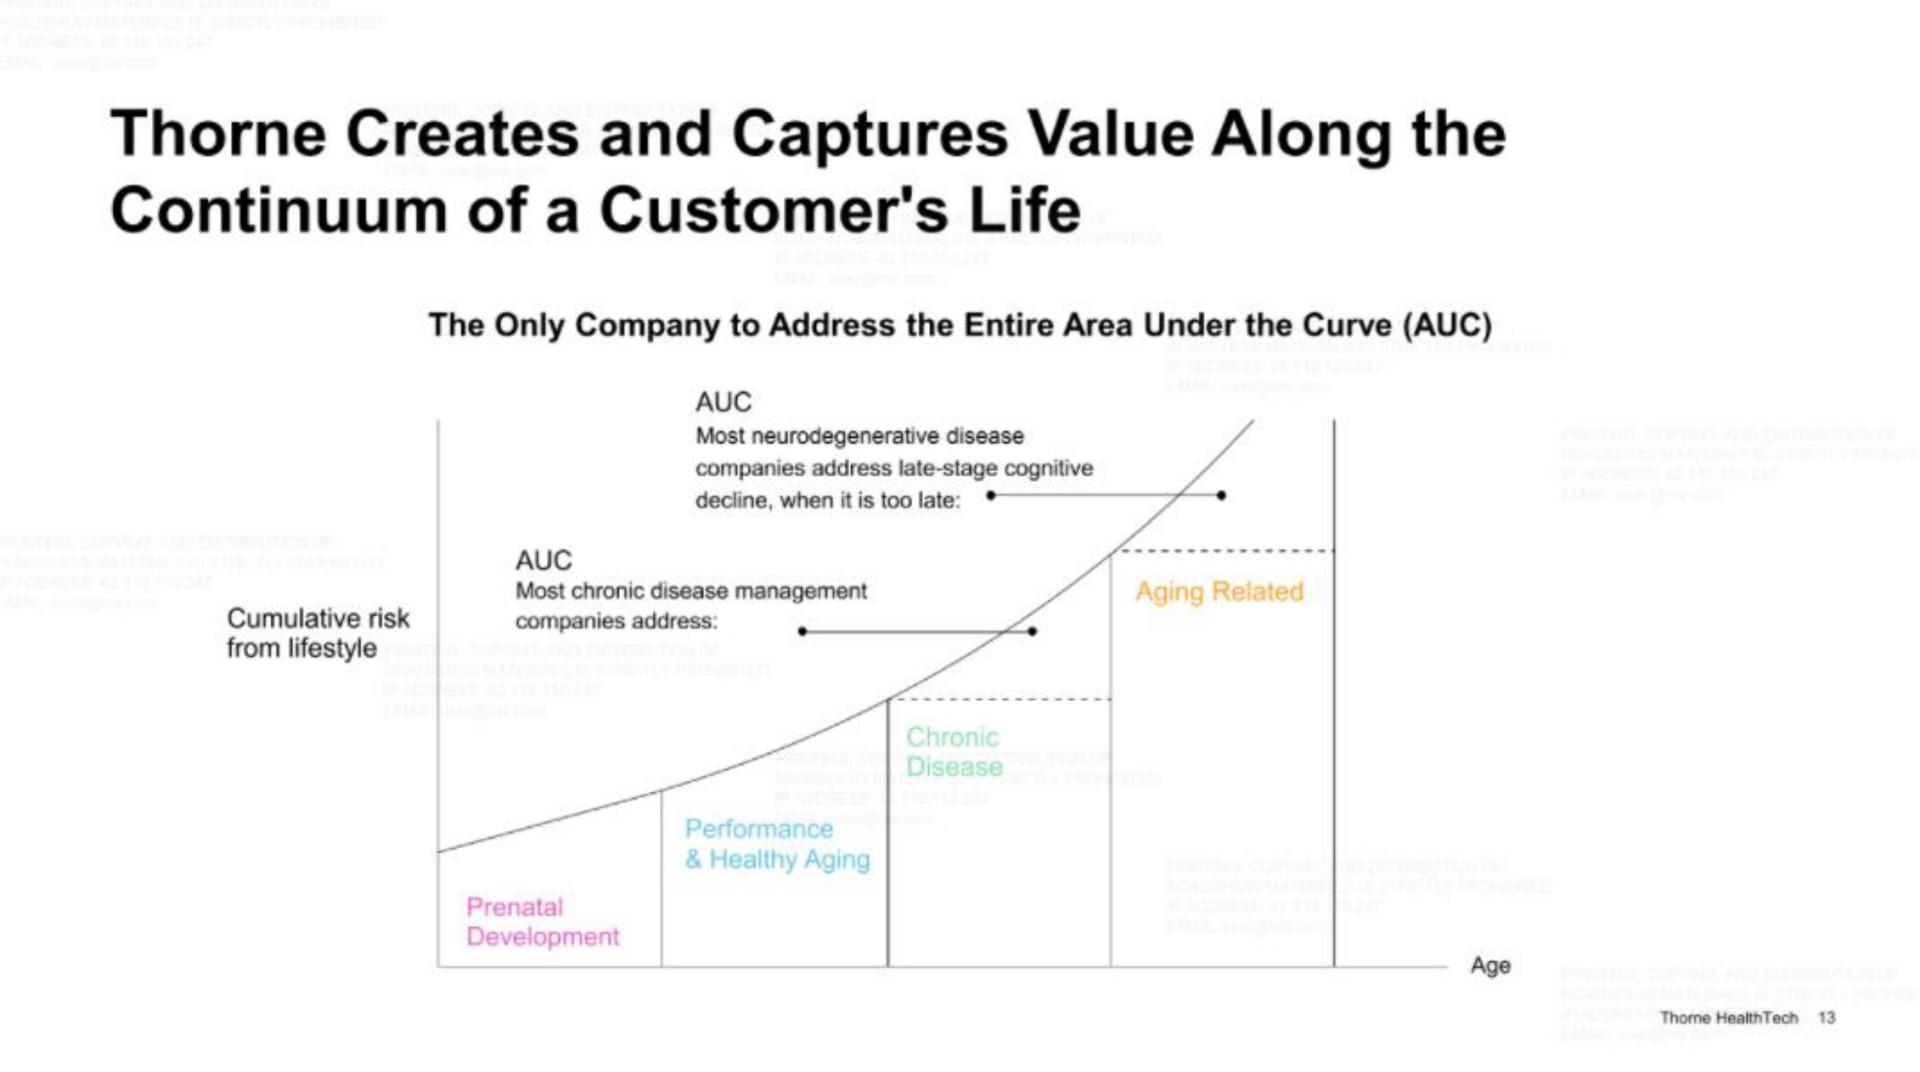 creates and captures value along the continuum of a customer life | Thorne HealthTech